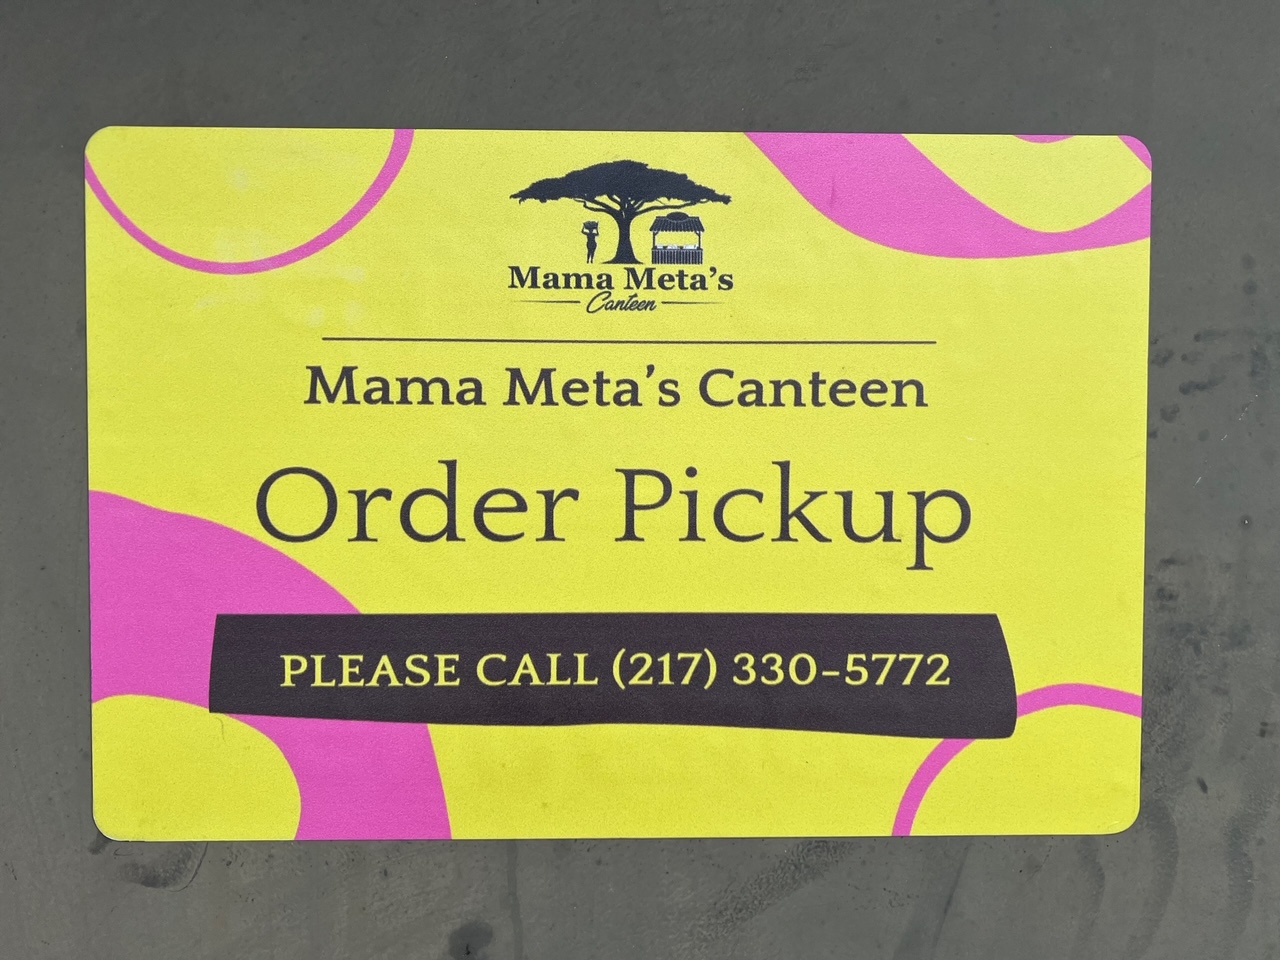 On a gray background, a yellow sign for Mama Meta's Canteen reads 